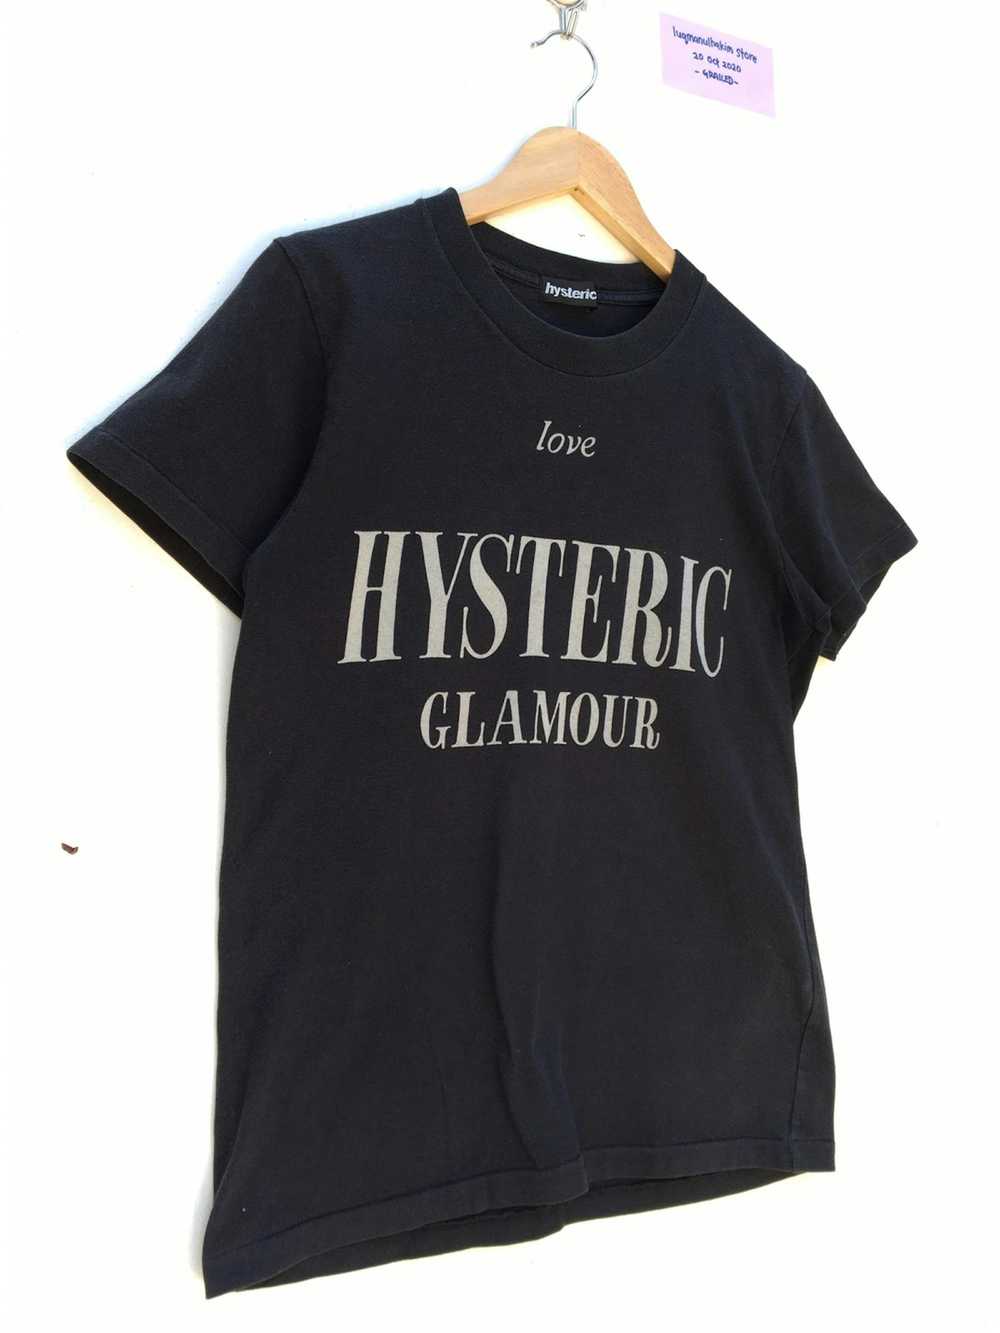 Hysteric Glamour × Vintage Vintage 90s Hysteric g… - image 2